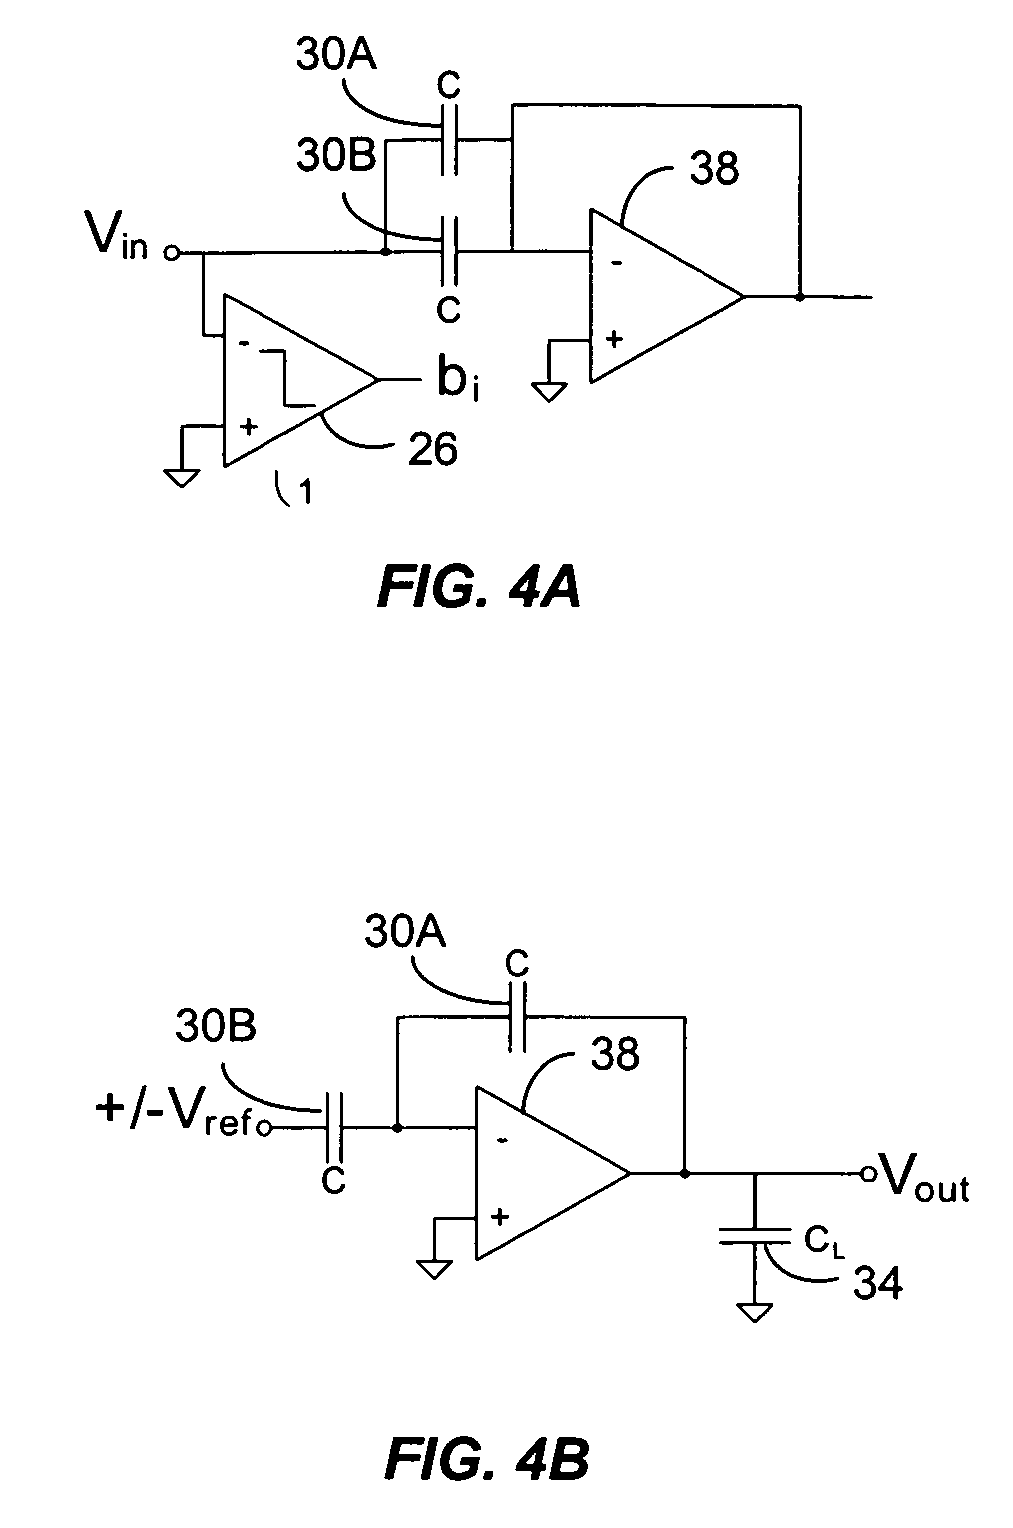 Comparator-based switched capacitor circuit for scaled semiconductor fabrication processes